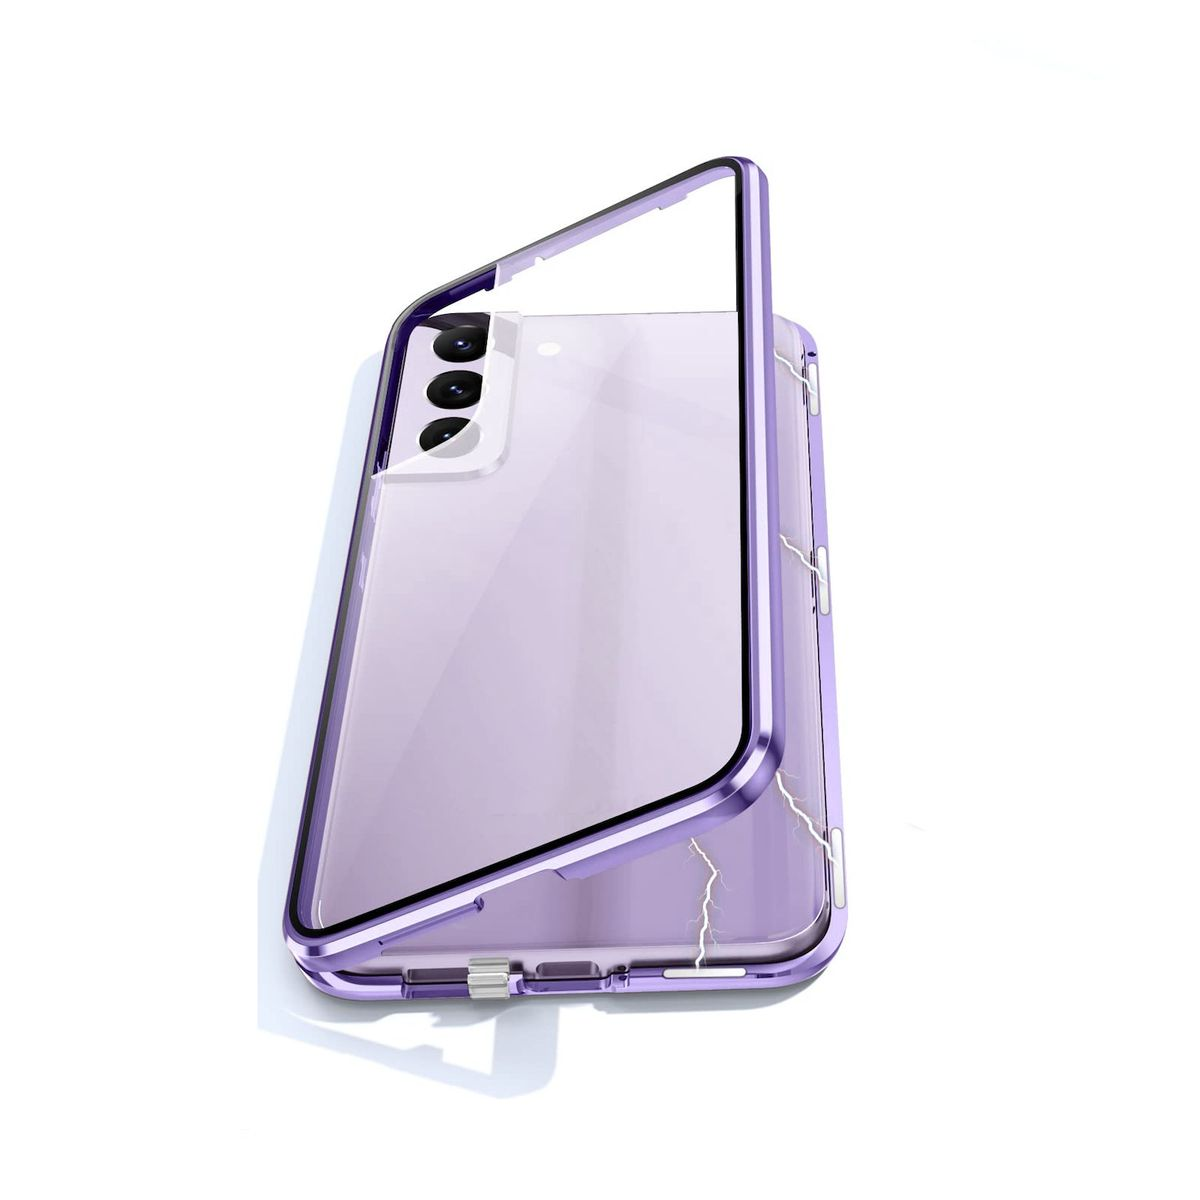 Beidseitiger / Transparent Grad Full Magnet S24, WIGENTO Galaxy Samsung, Lila 360 Hülle, Glas Cover,